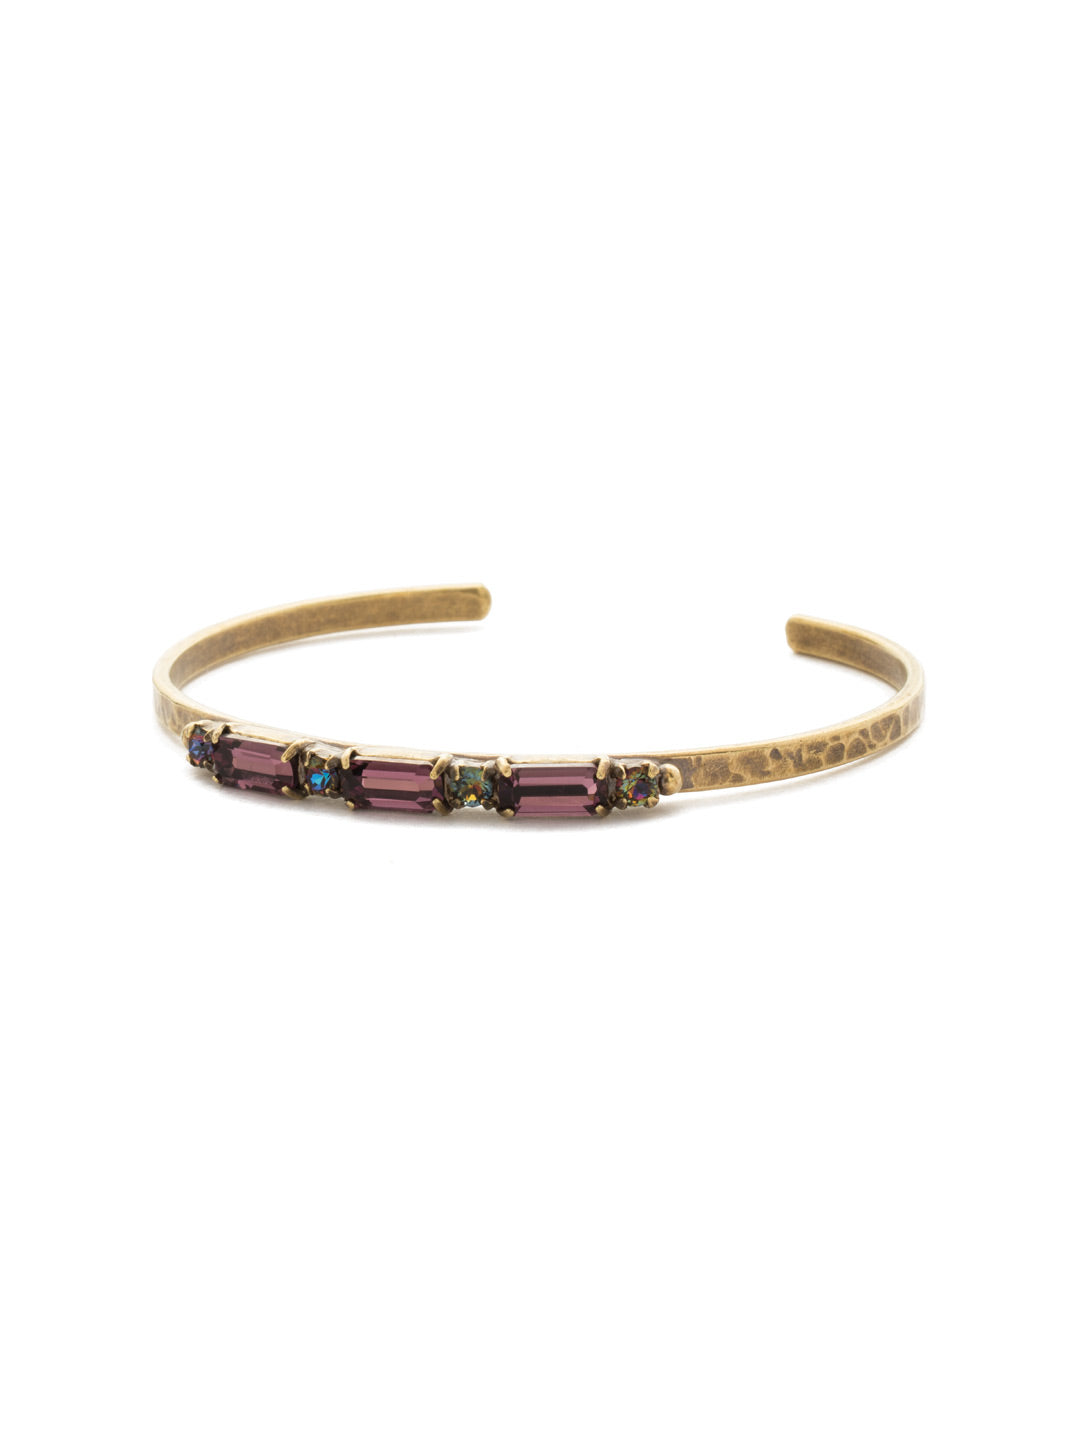 Line and Dot Cuff Bracelet - BDK50AGROP - <p>A thin, hammered oh-so-stackable cuff bracelet with an alternating pattern of round and baguette crystals. From Sorrelli's Royal Plum collection in our Antique Gold-tone finish.</p>